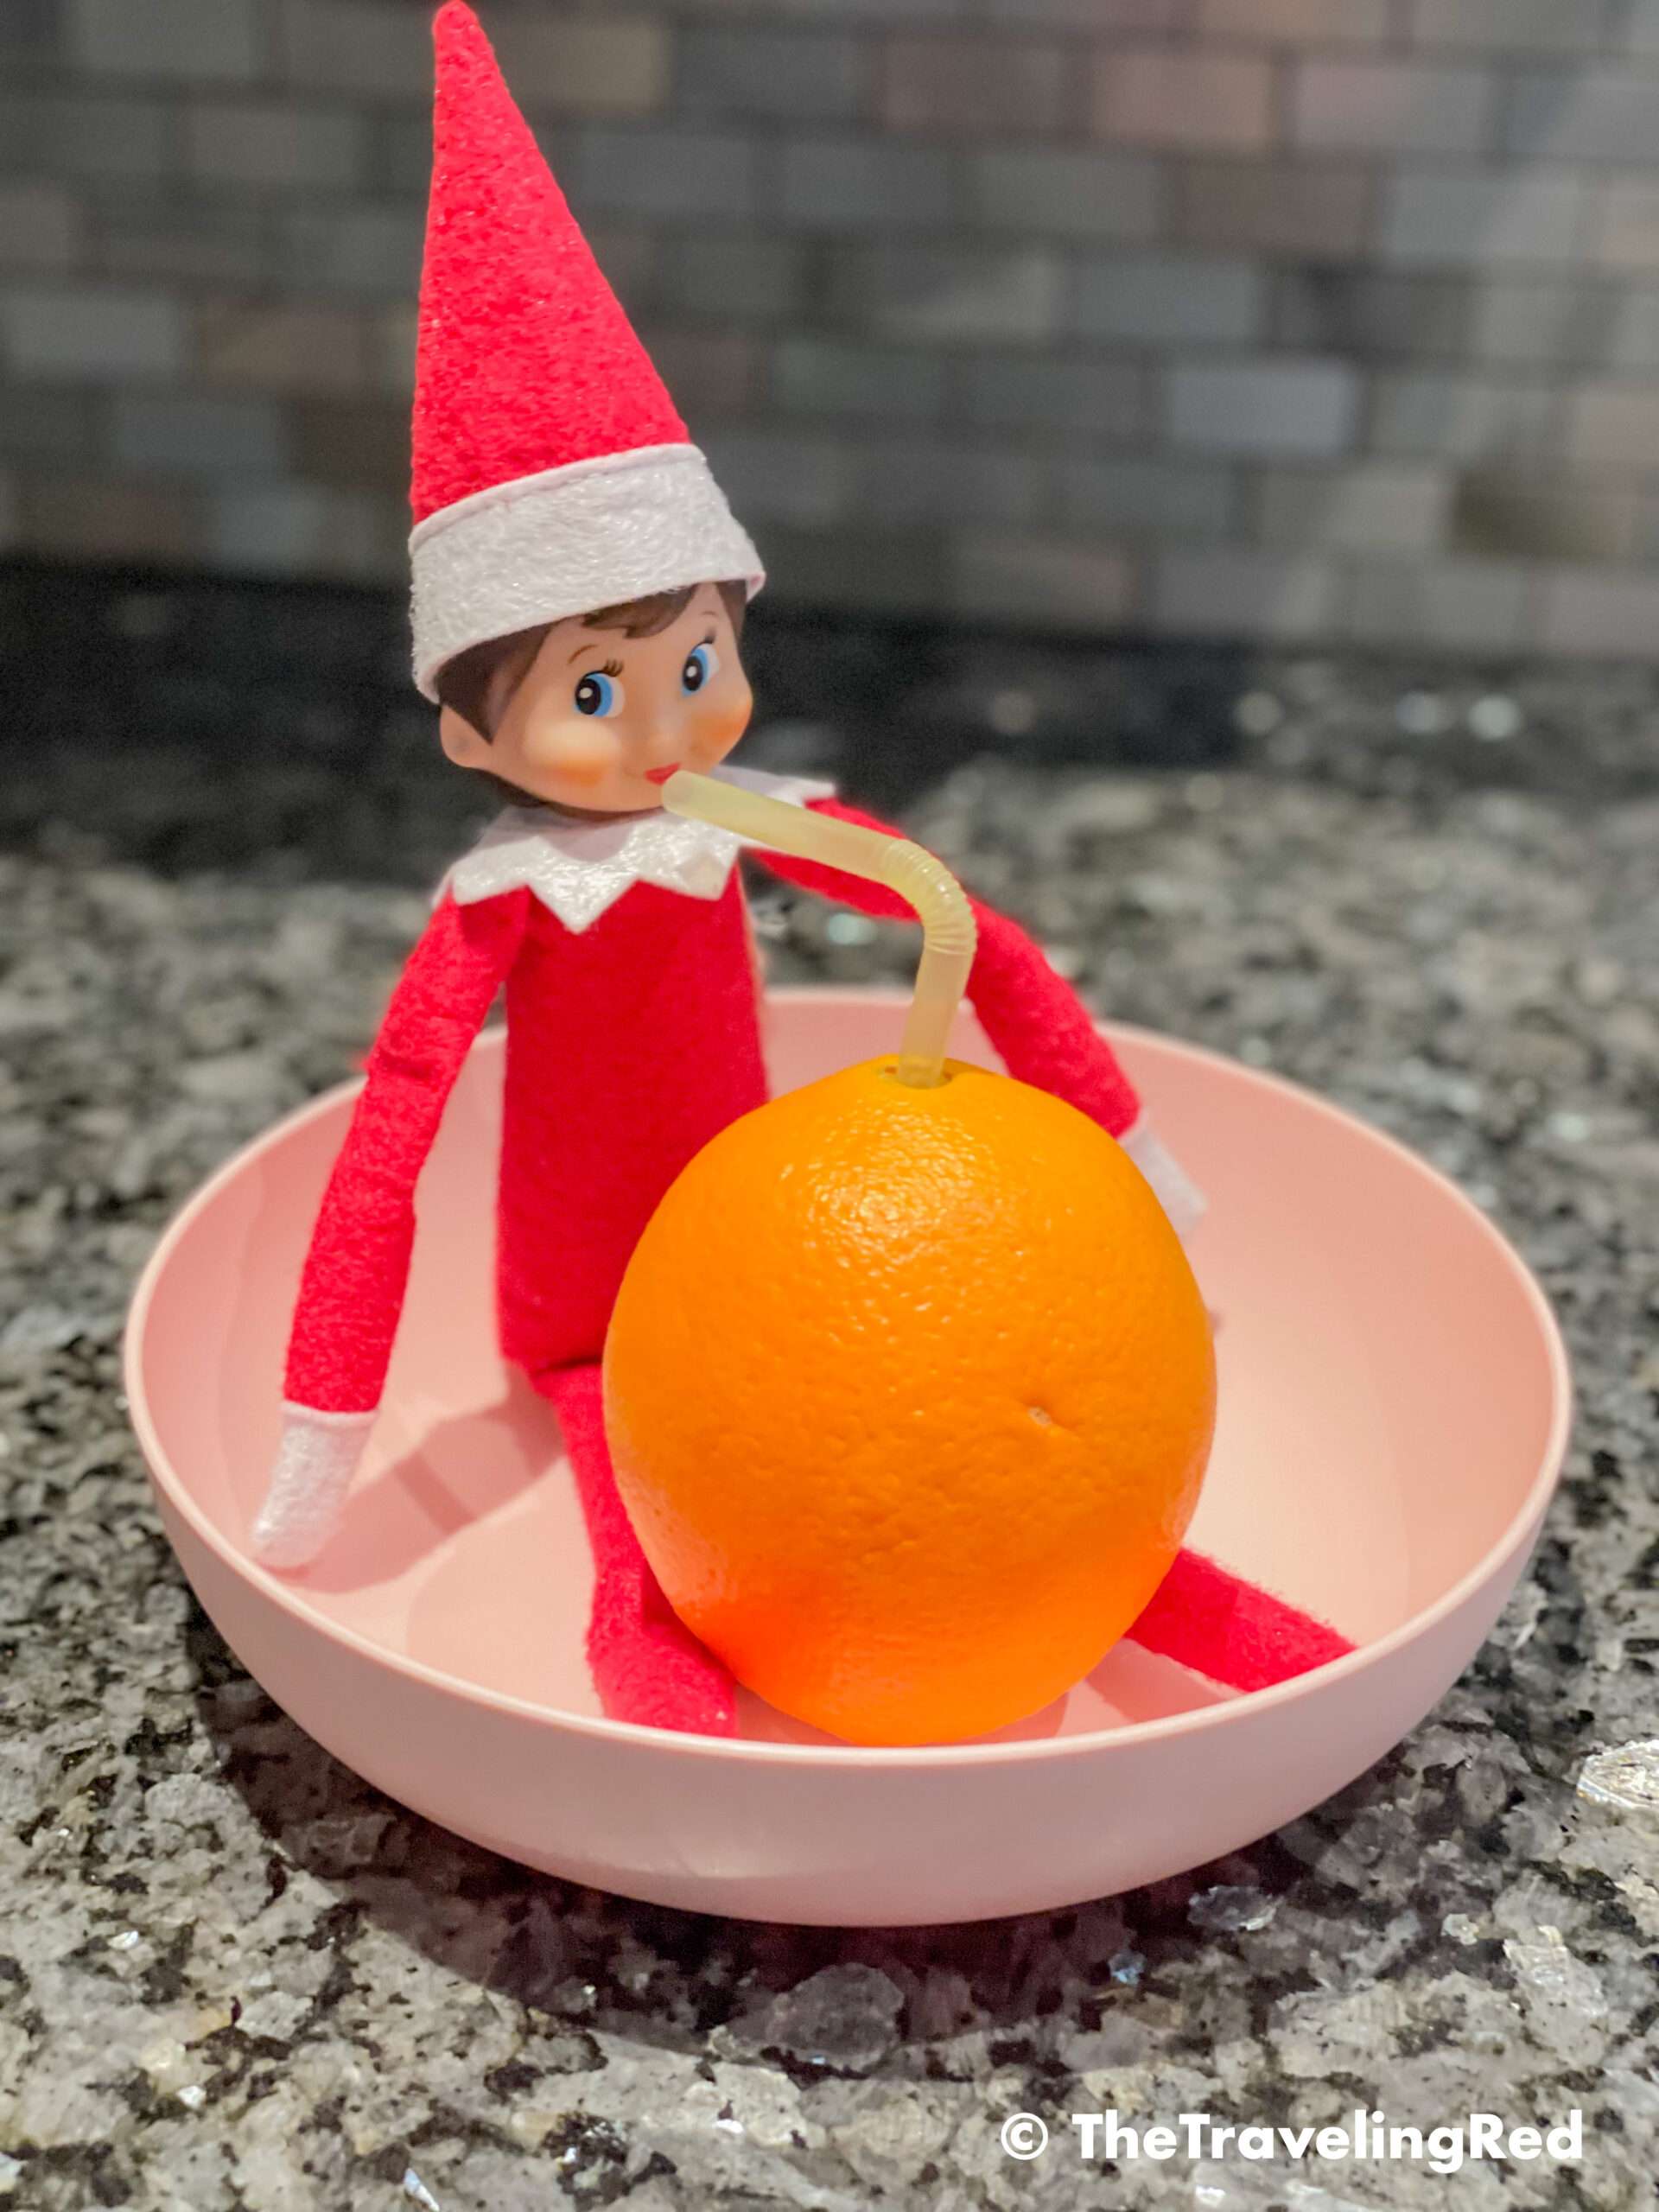 Naughty Elf on the shelf drinking orange juice right out of an orange by inserting a straw. Fun and easy elf on the shelf ideas for a naughty elf that are quick and easy using things you have at home.